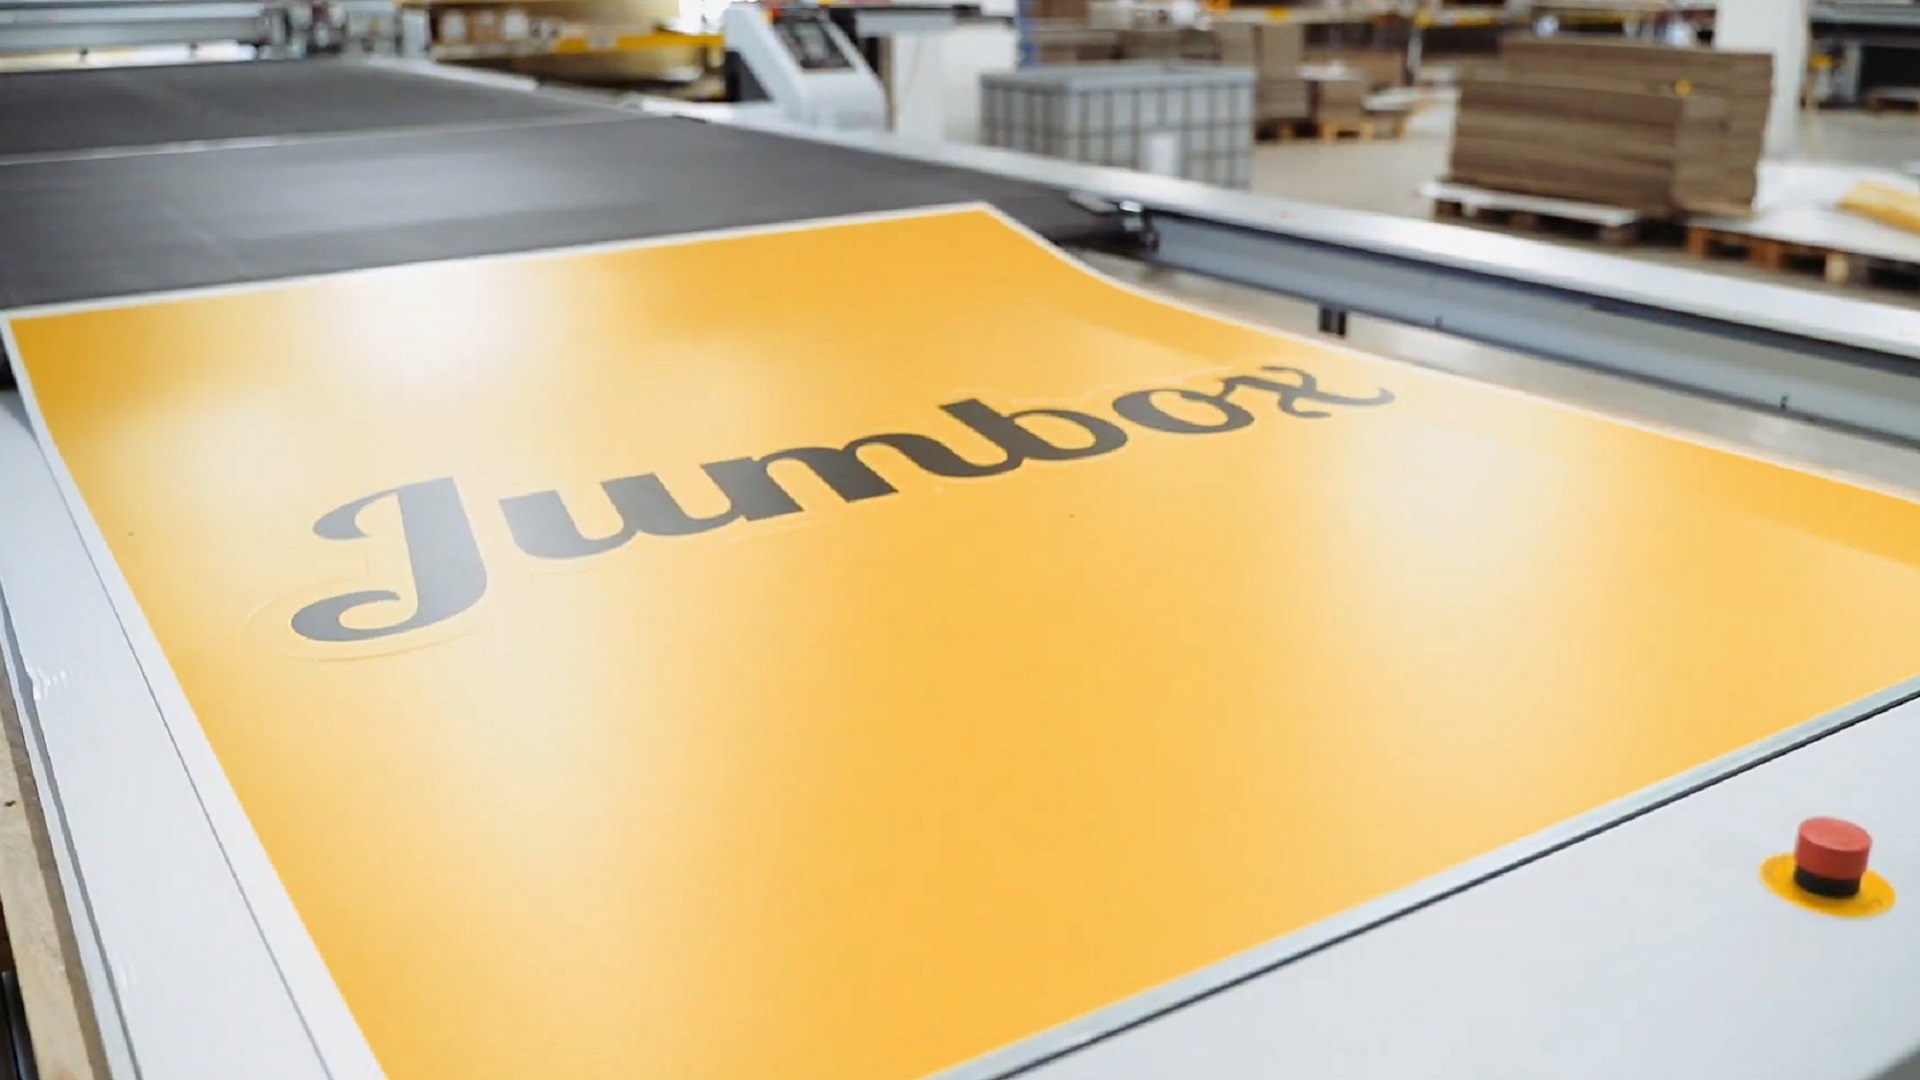 JUMBOX - Commercial for digital printing